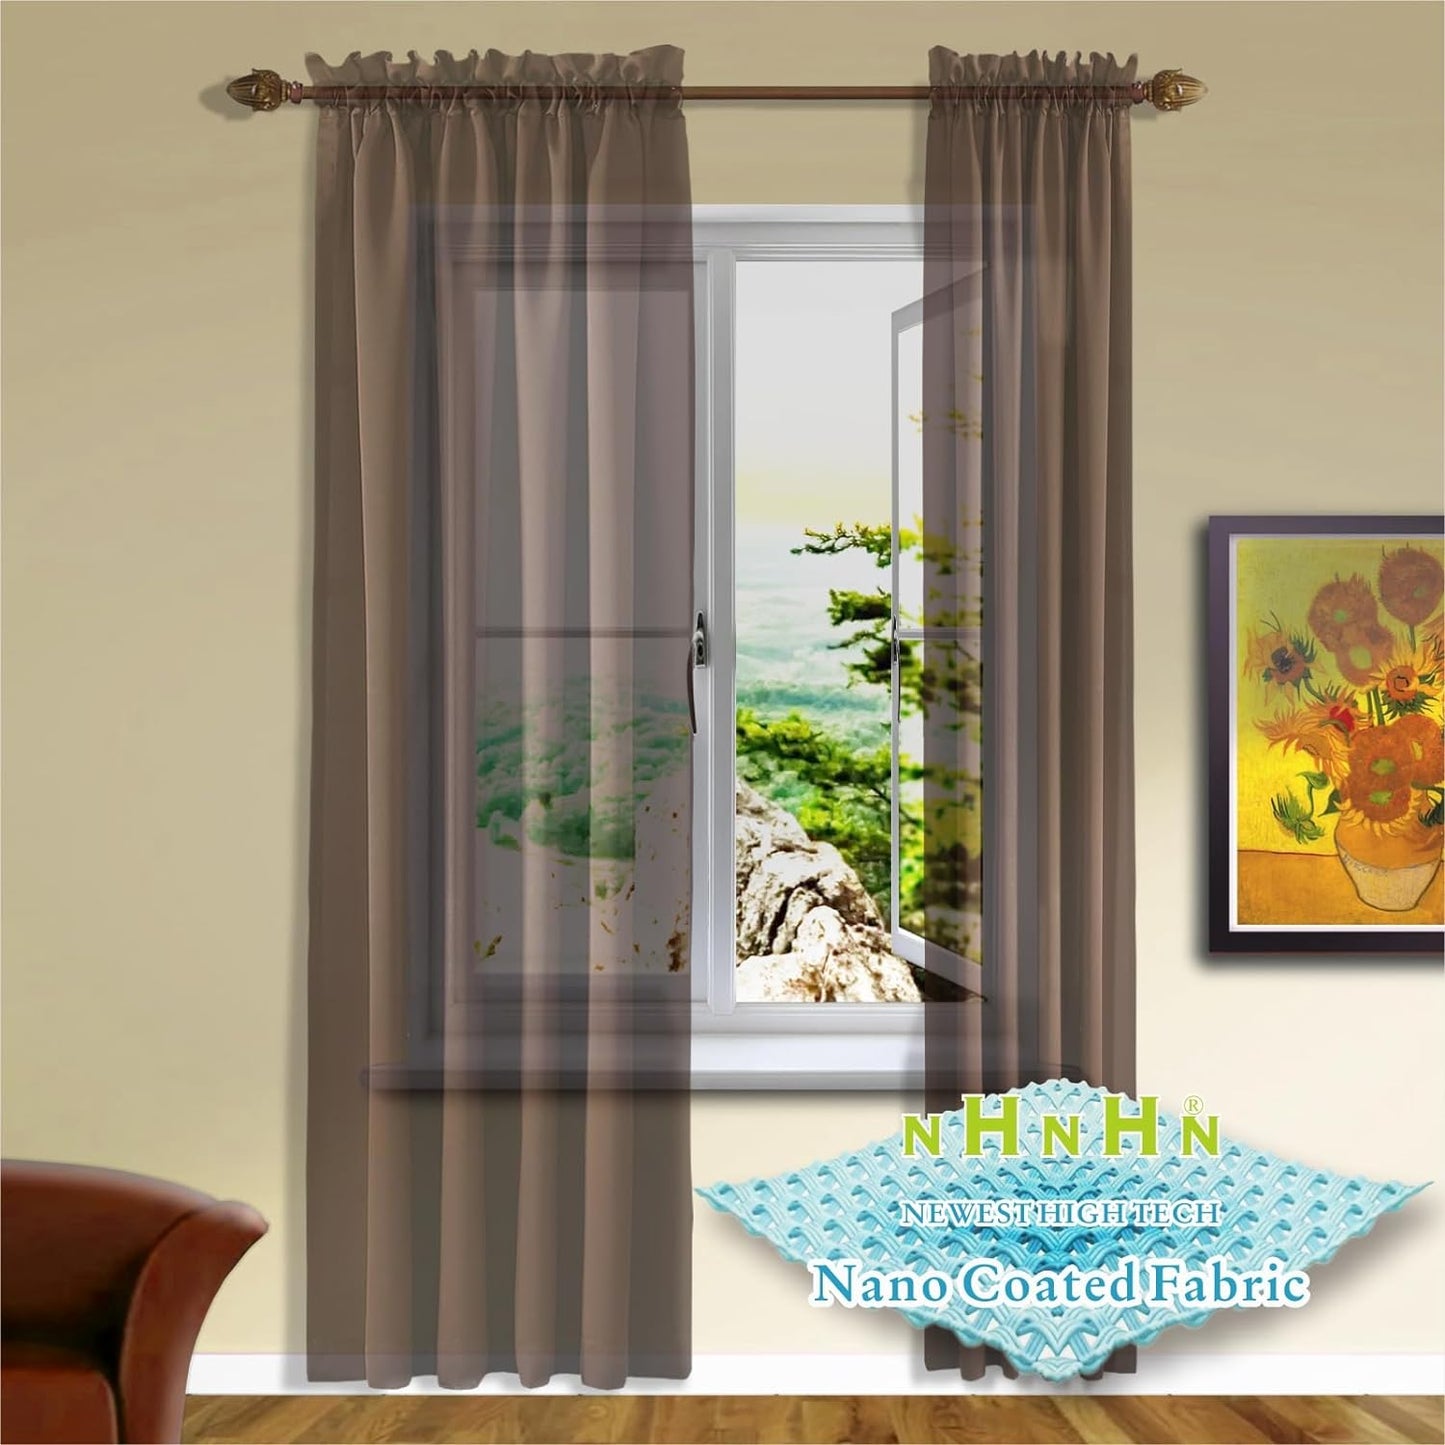 Nano Material Coated White Sheer Curtains 72 Inches Long, Rod Pocket Window Drapes Voile Sheer Curtain 2 Panels for Living Room Bedroom Kitchen (White, W52 X L72)  NHNHN Light Brown 52W X 72L | 2 Panels 